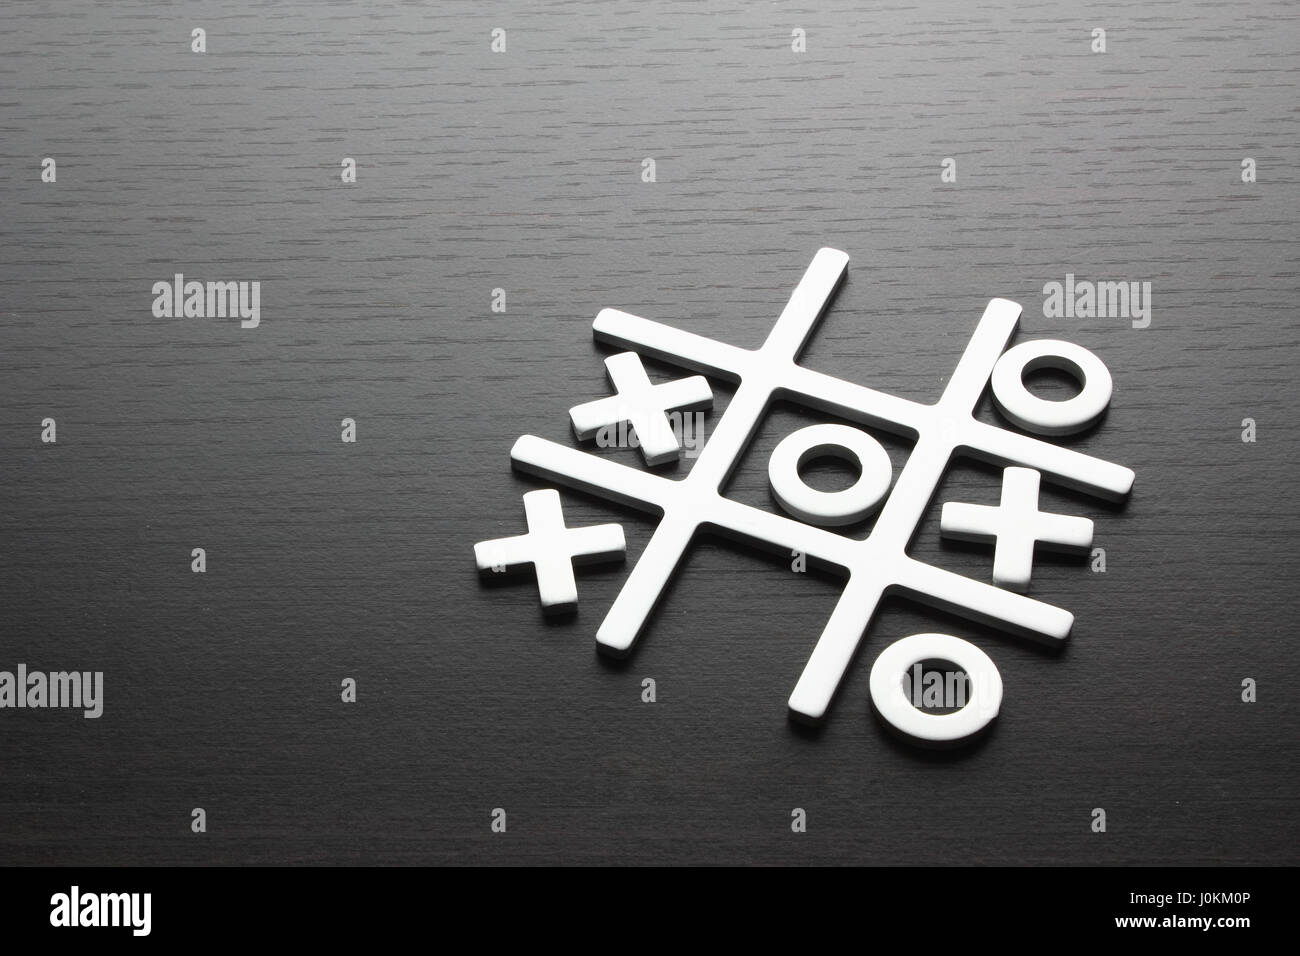 Tic Tac Toe Game on Wooden Background Stock Photo - Alamy